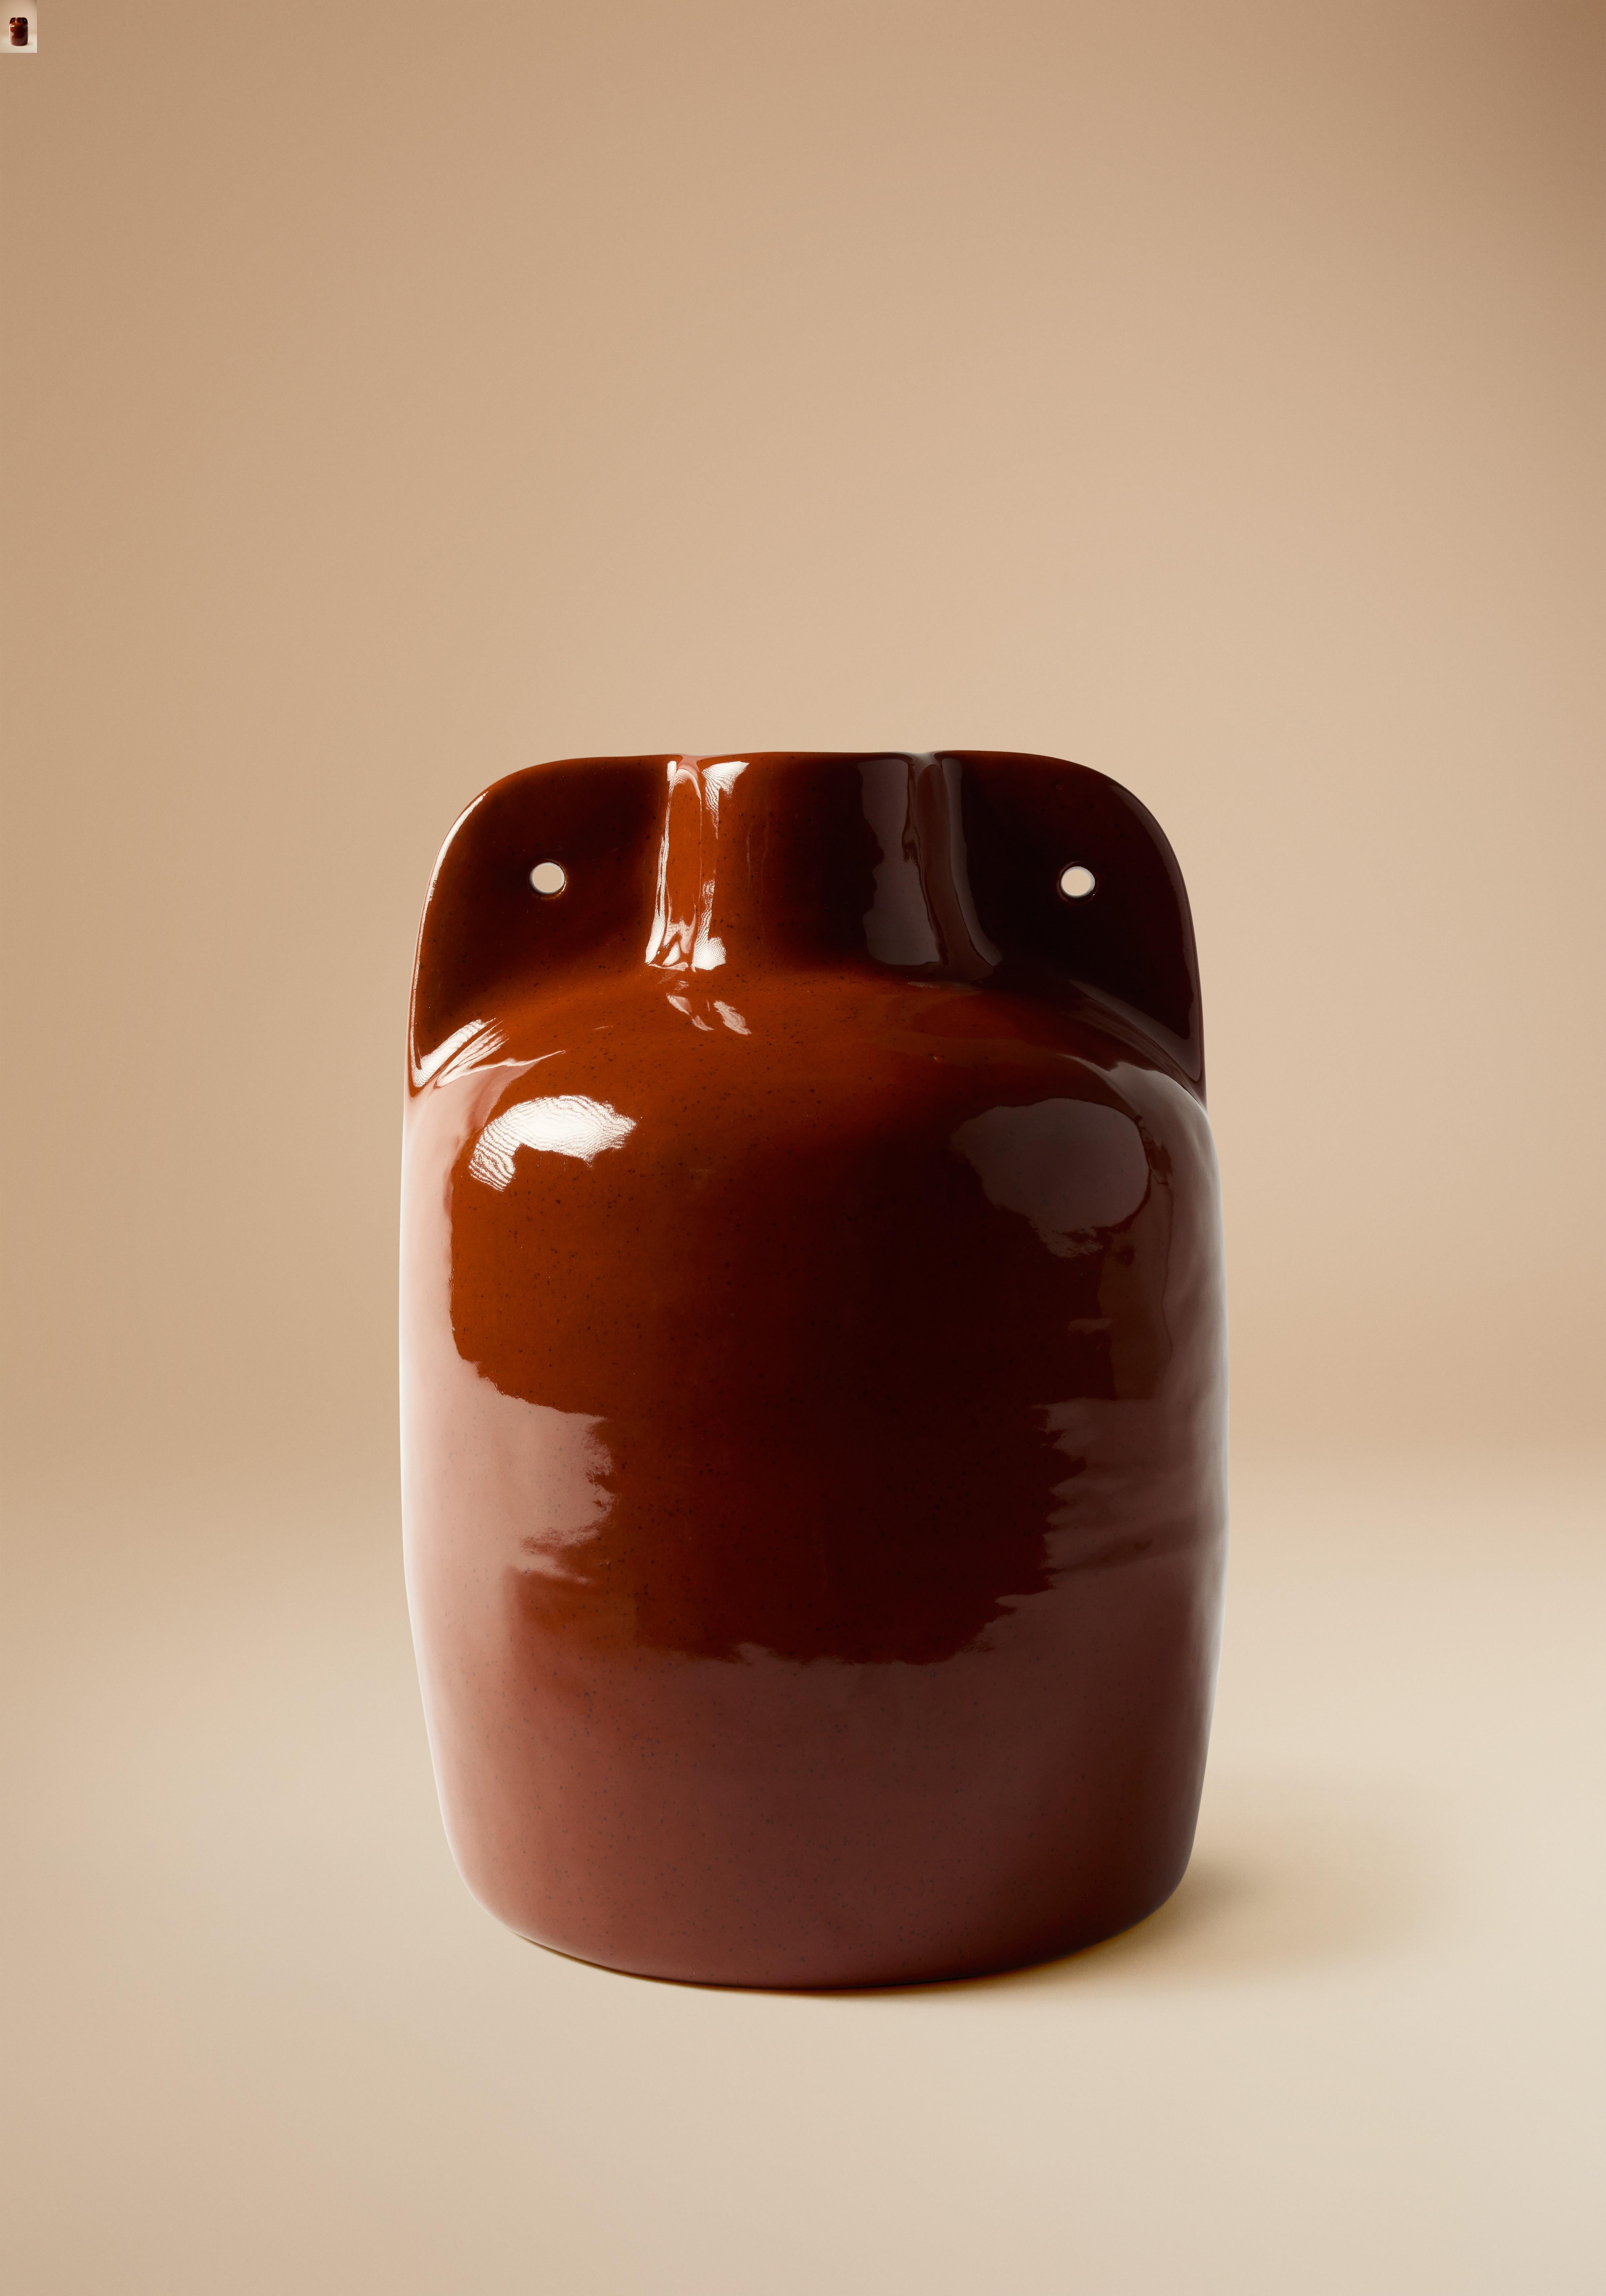 Contemporary Vessel 07 in Smooth Stoneware Clay. Handmade by Jade Paton for Lemon For Sale